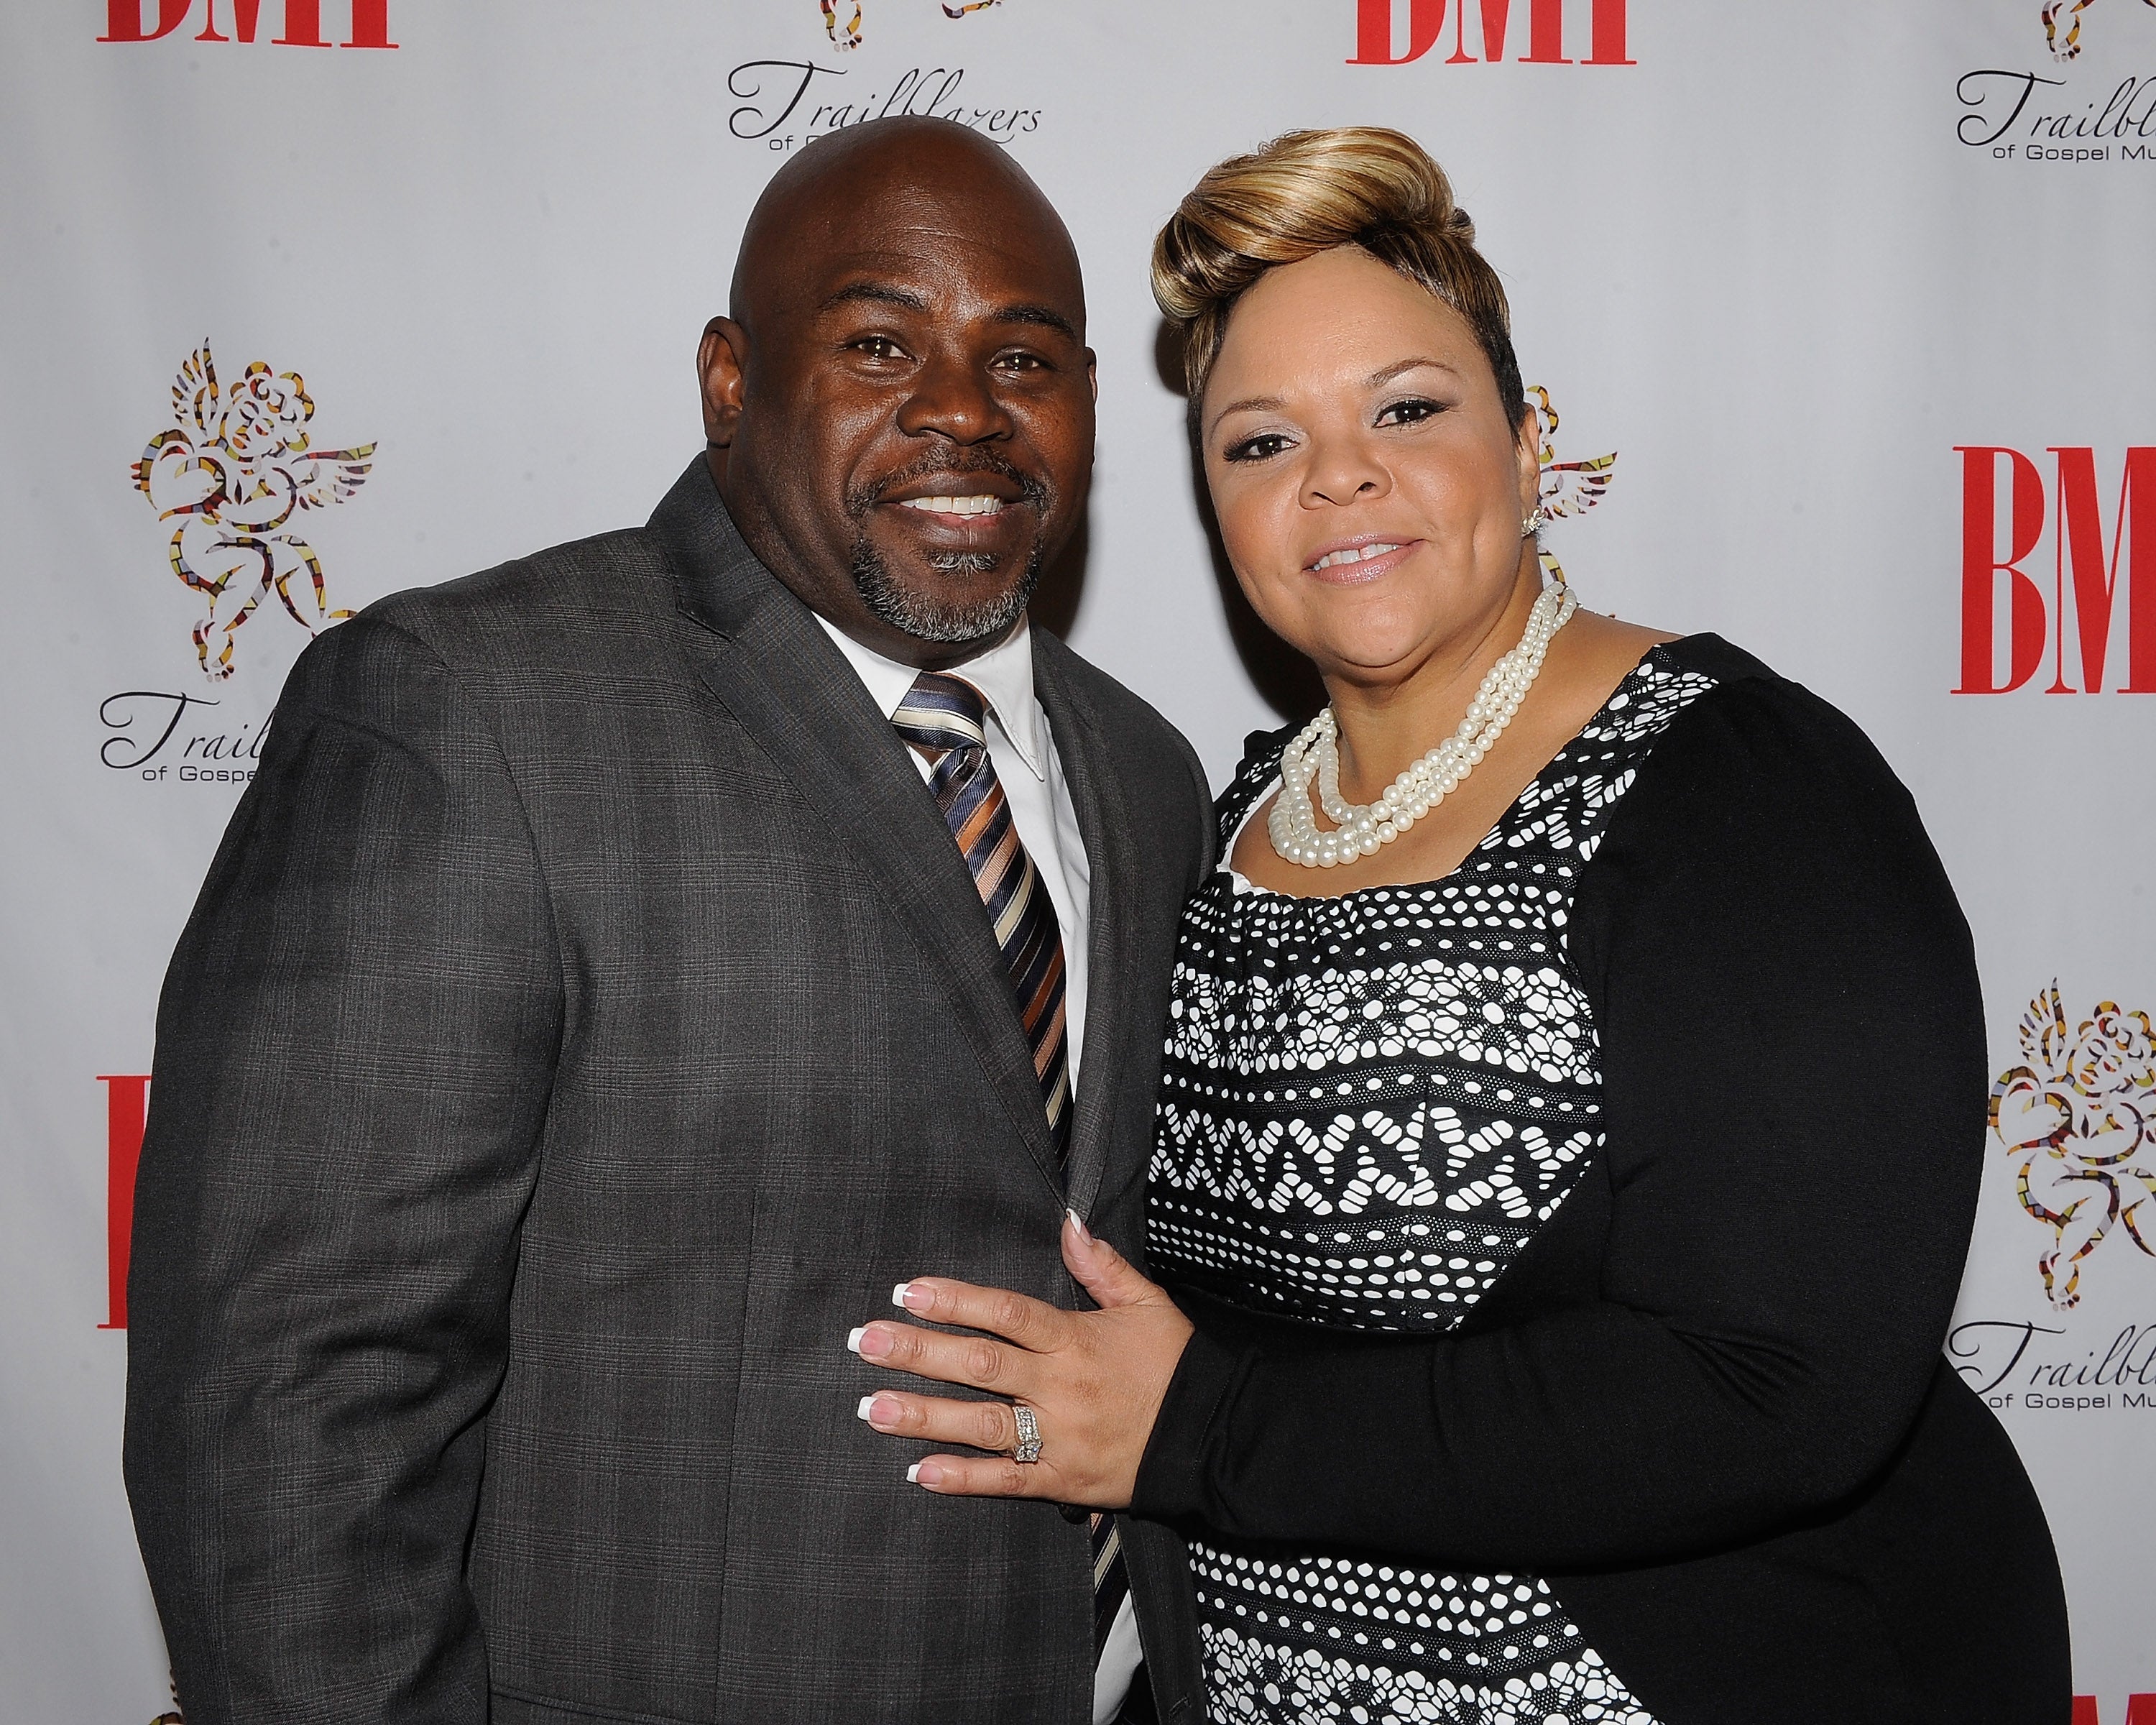 Tamela And David Mann Are Putting Out ‘Making Baby Music’ For Christians